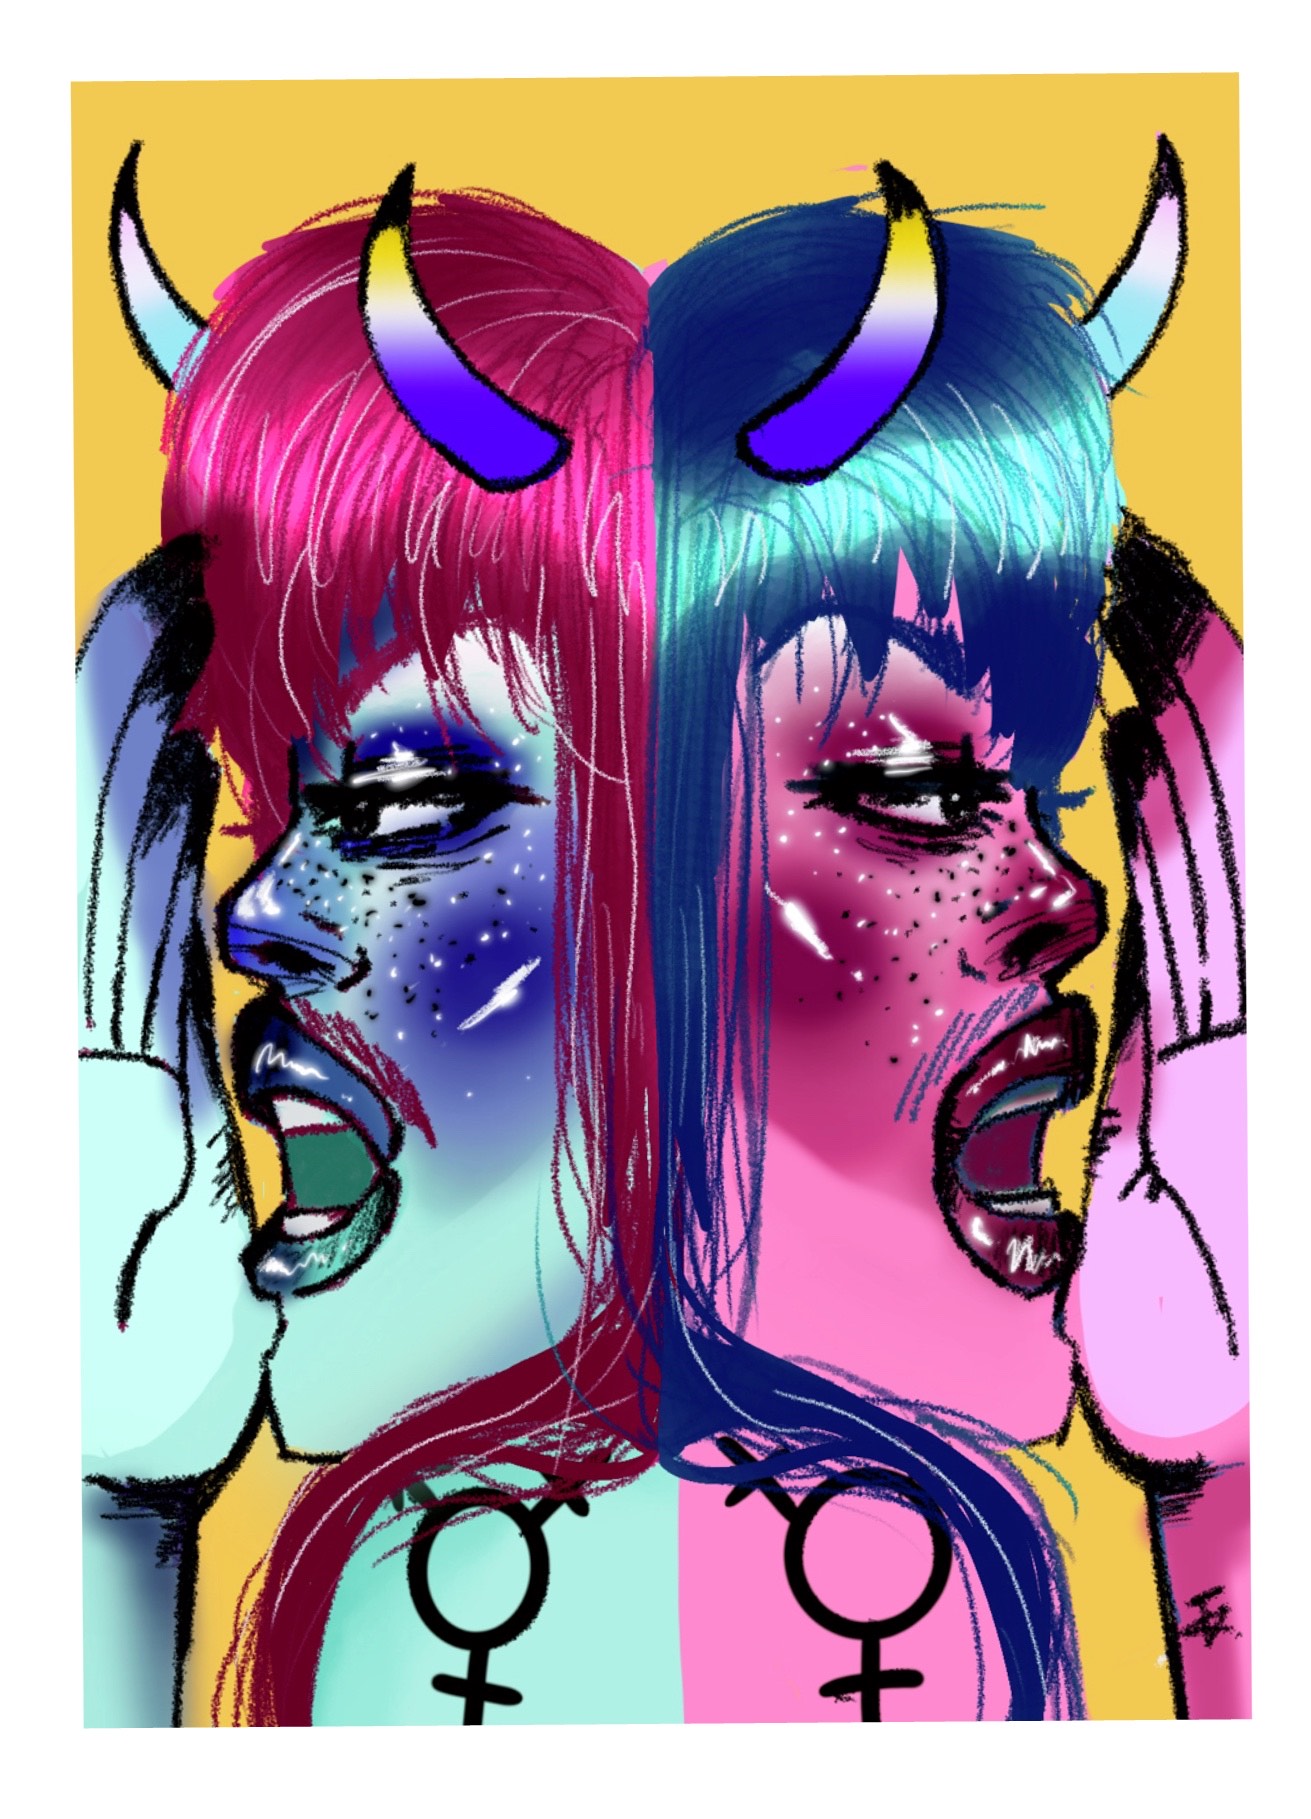 A yellow portrait postcard shows two figures, back to back. They have their hands to their mouths as if calling or shouting. The one on the left is blue with pink hair and the one on the right is pink with blue hair. Their hair is long with a voluminous fringe, almost forming a heart-shape together, and they each have a set of horns in nonbinary flag colours. They have shining cheekbones, lips and nose, freckles, dark eye make-up, a slight moustache and a trans symbol tattoo on their shoulders.